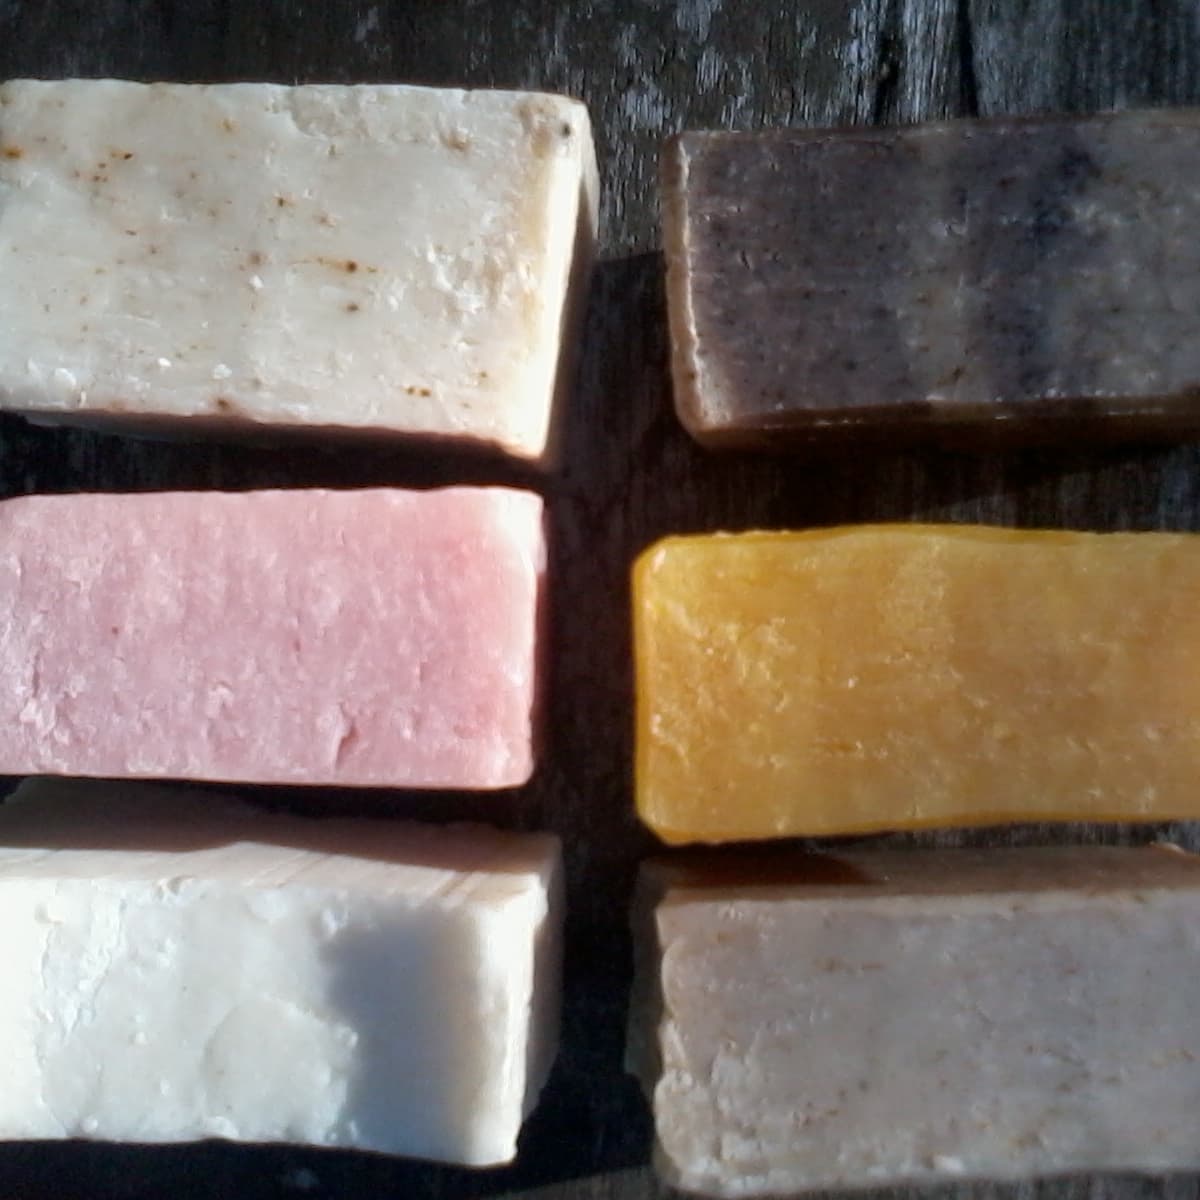 Homemade Glycerin Soap Recipe (From Scratch) - Oh, The Things We'll Make!